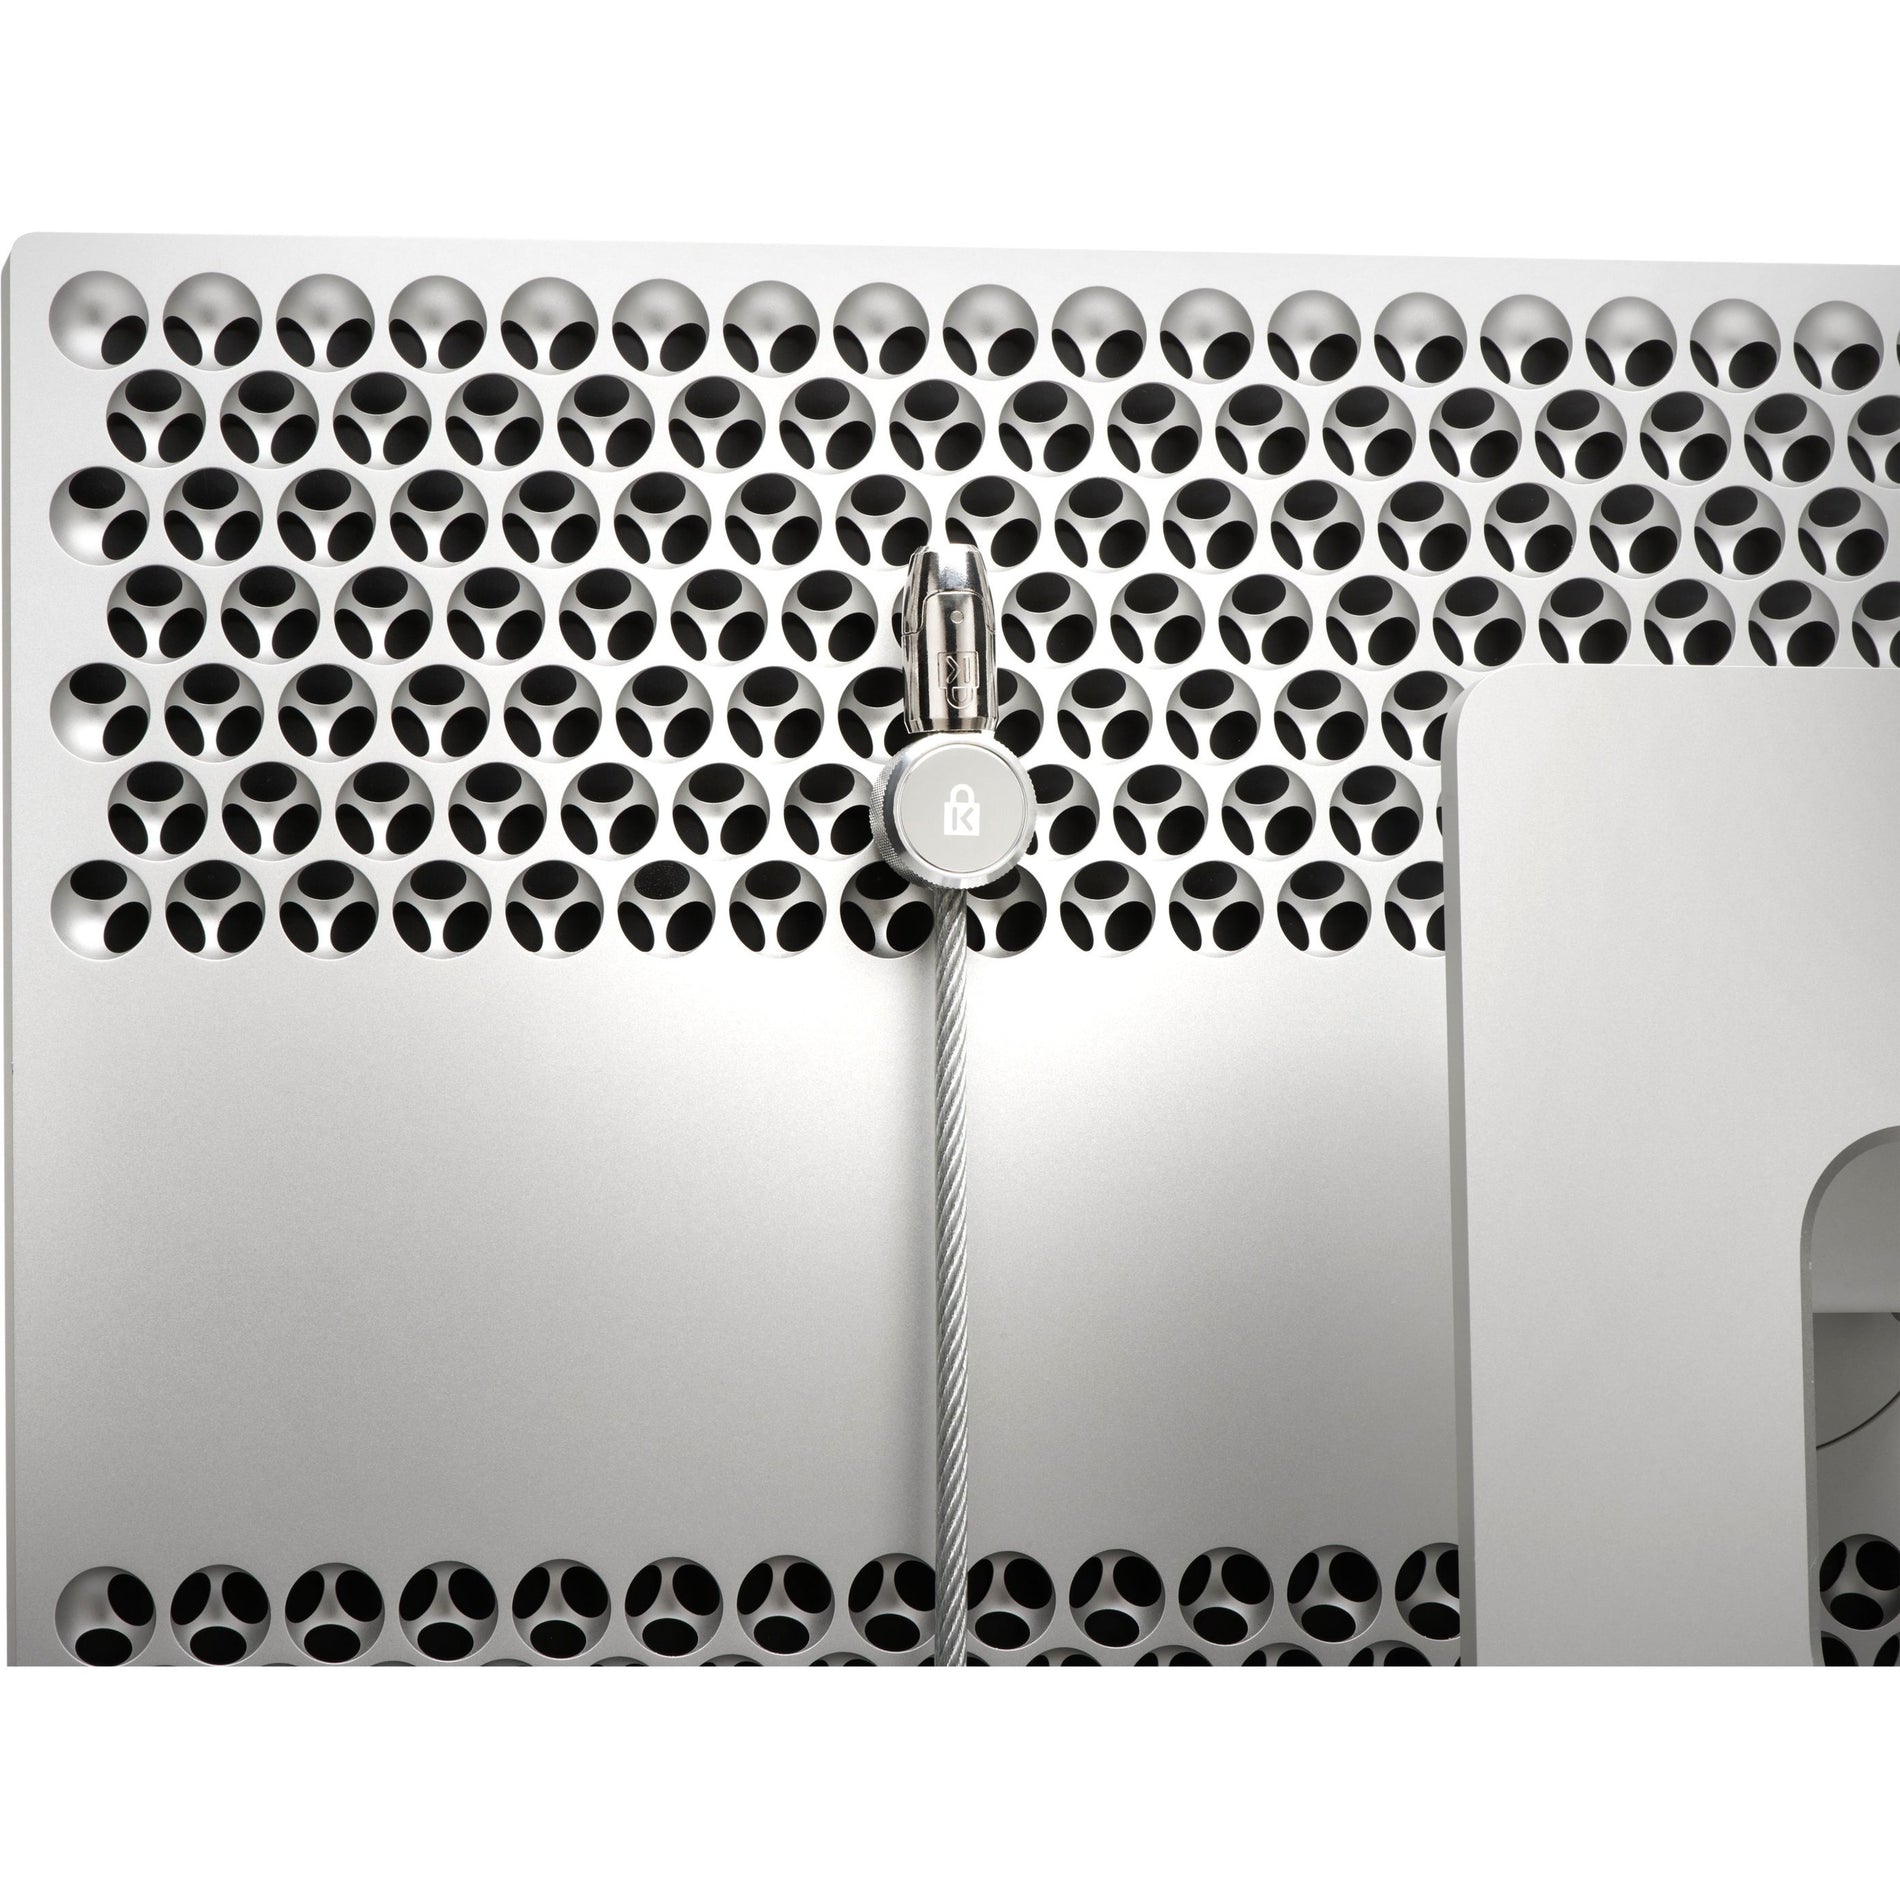 Kensington K63150WW Mac Pro and Pro Display XDR Locking Kit, Secure Your Apple Devices with Ease